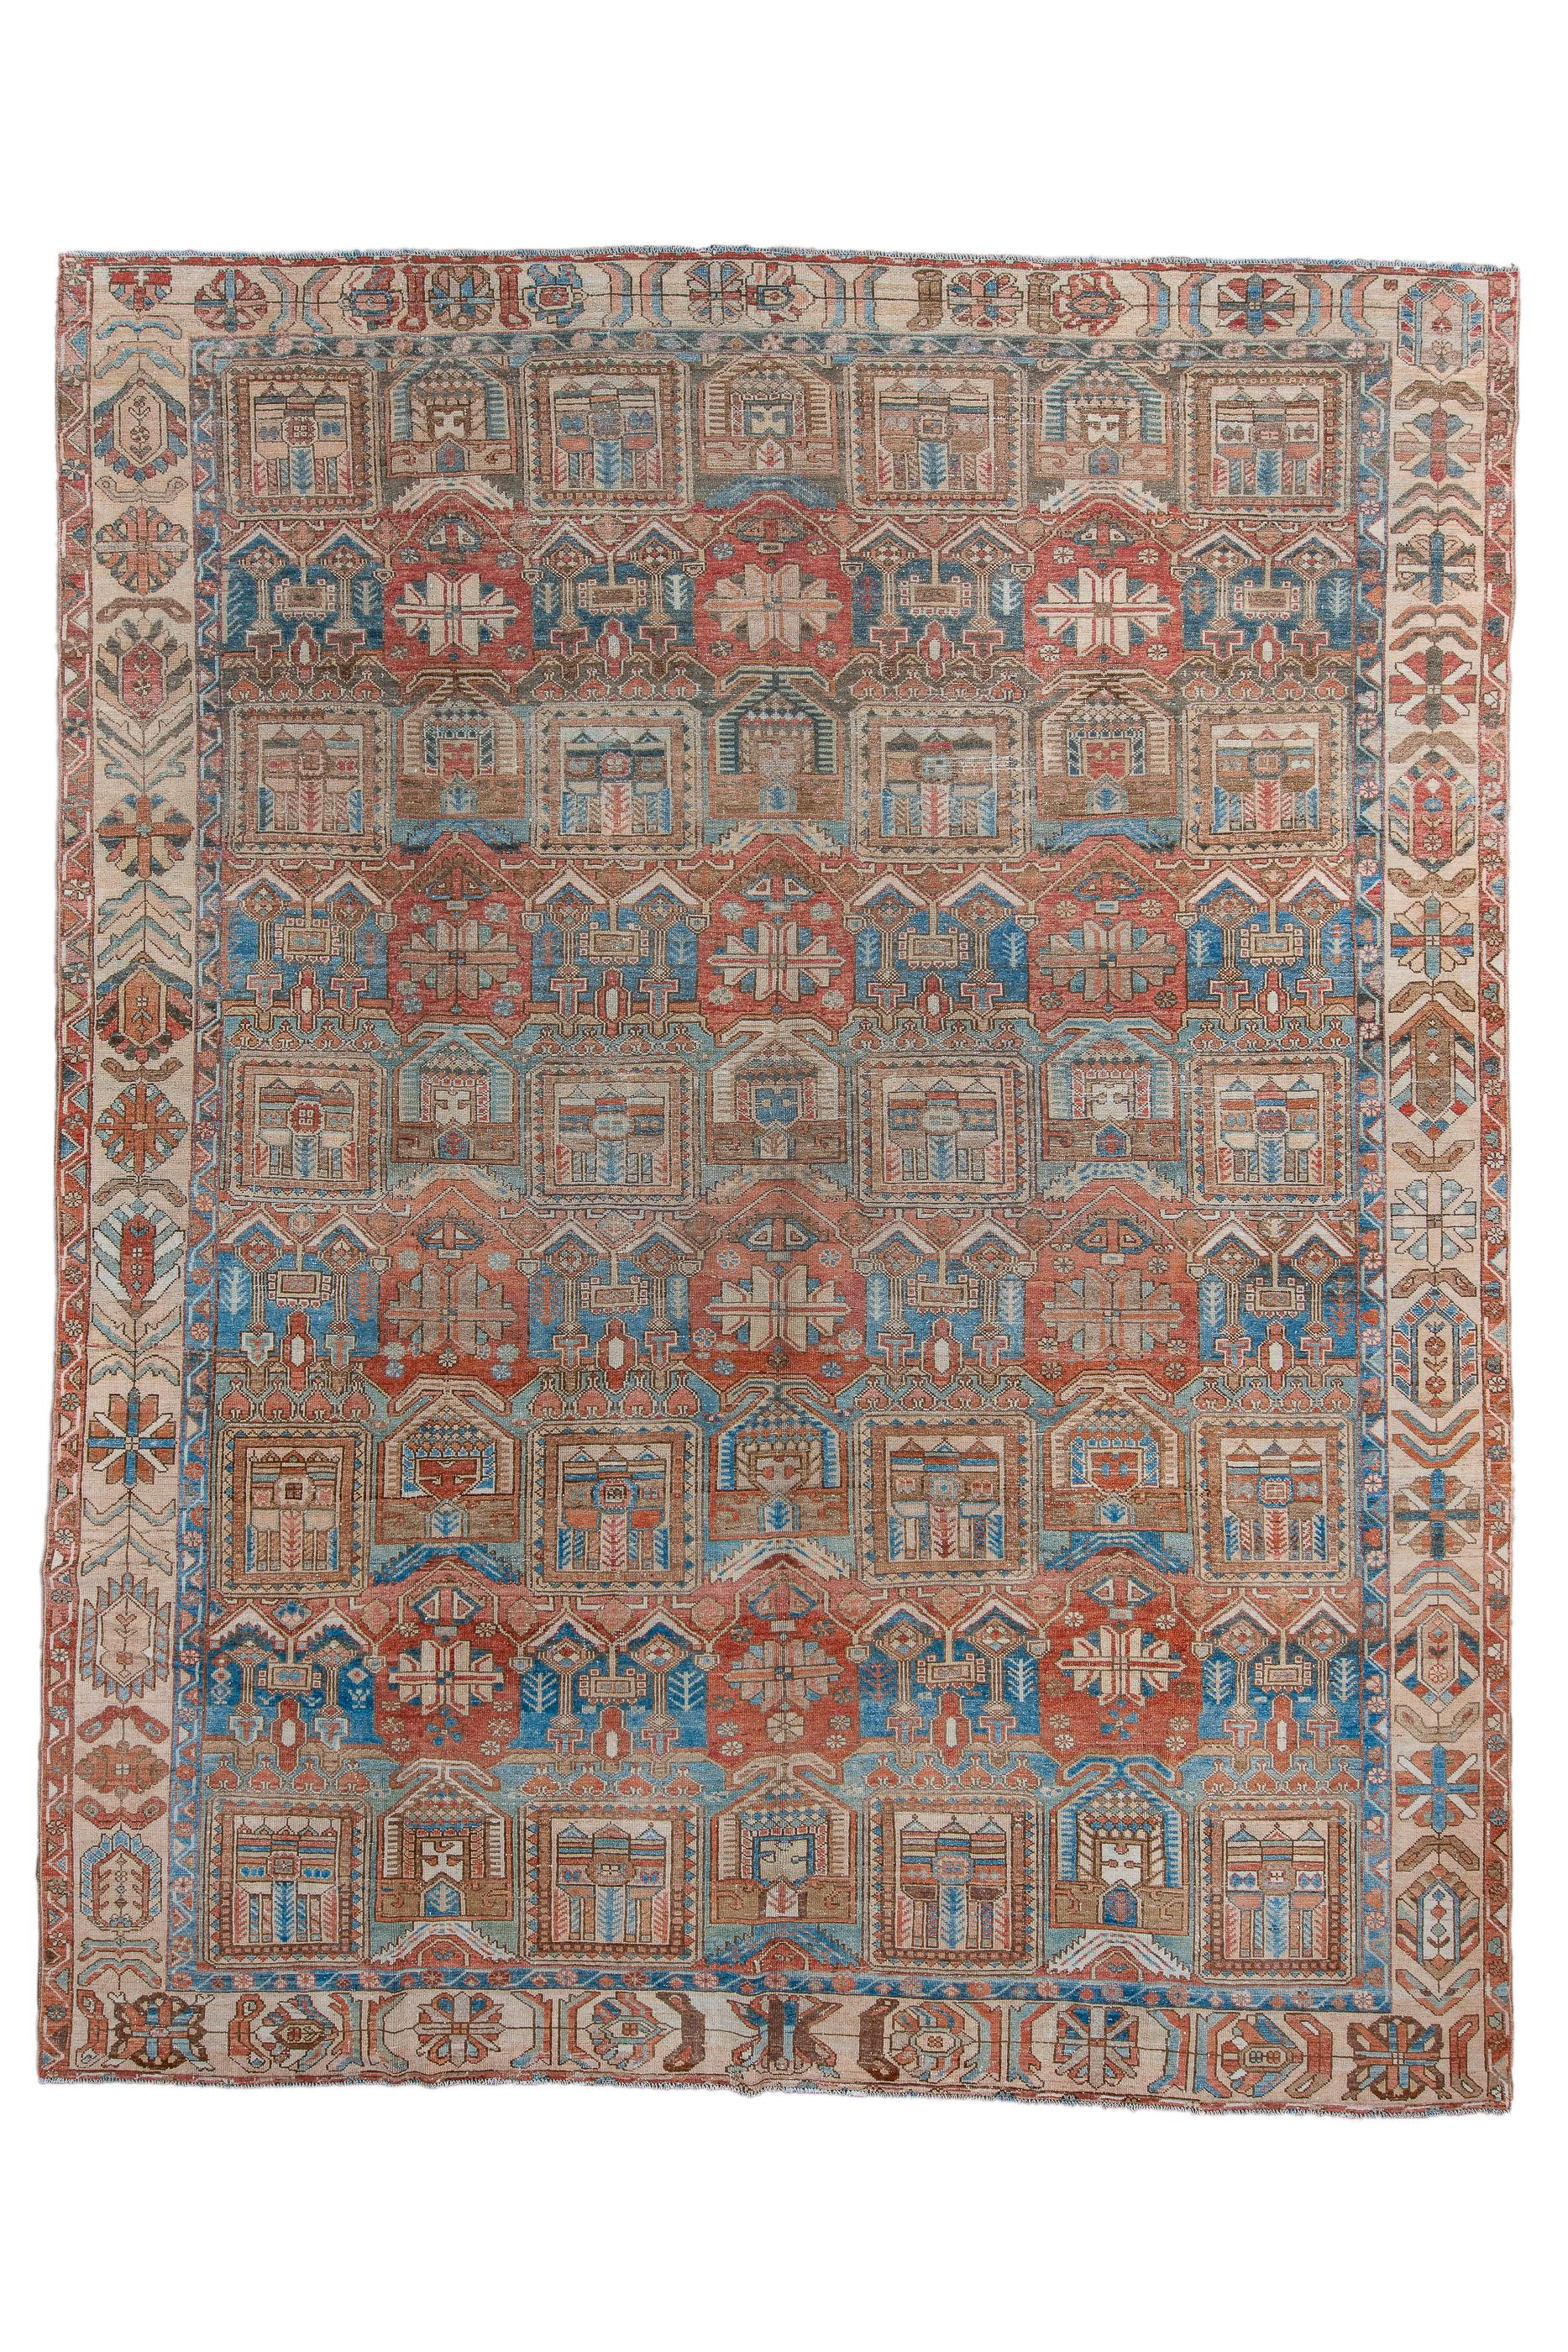 A sand border of chains of palmettes, flowers and rosettes, sets off the  closely set  seven column repeating pattern of  garden squares, single and double pent roof motives and red reserves in this Chahar Mahal village piece. Moderate/medium weave